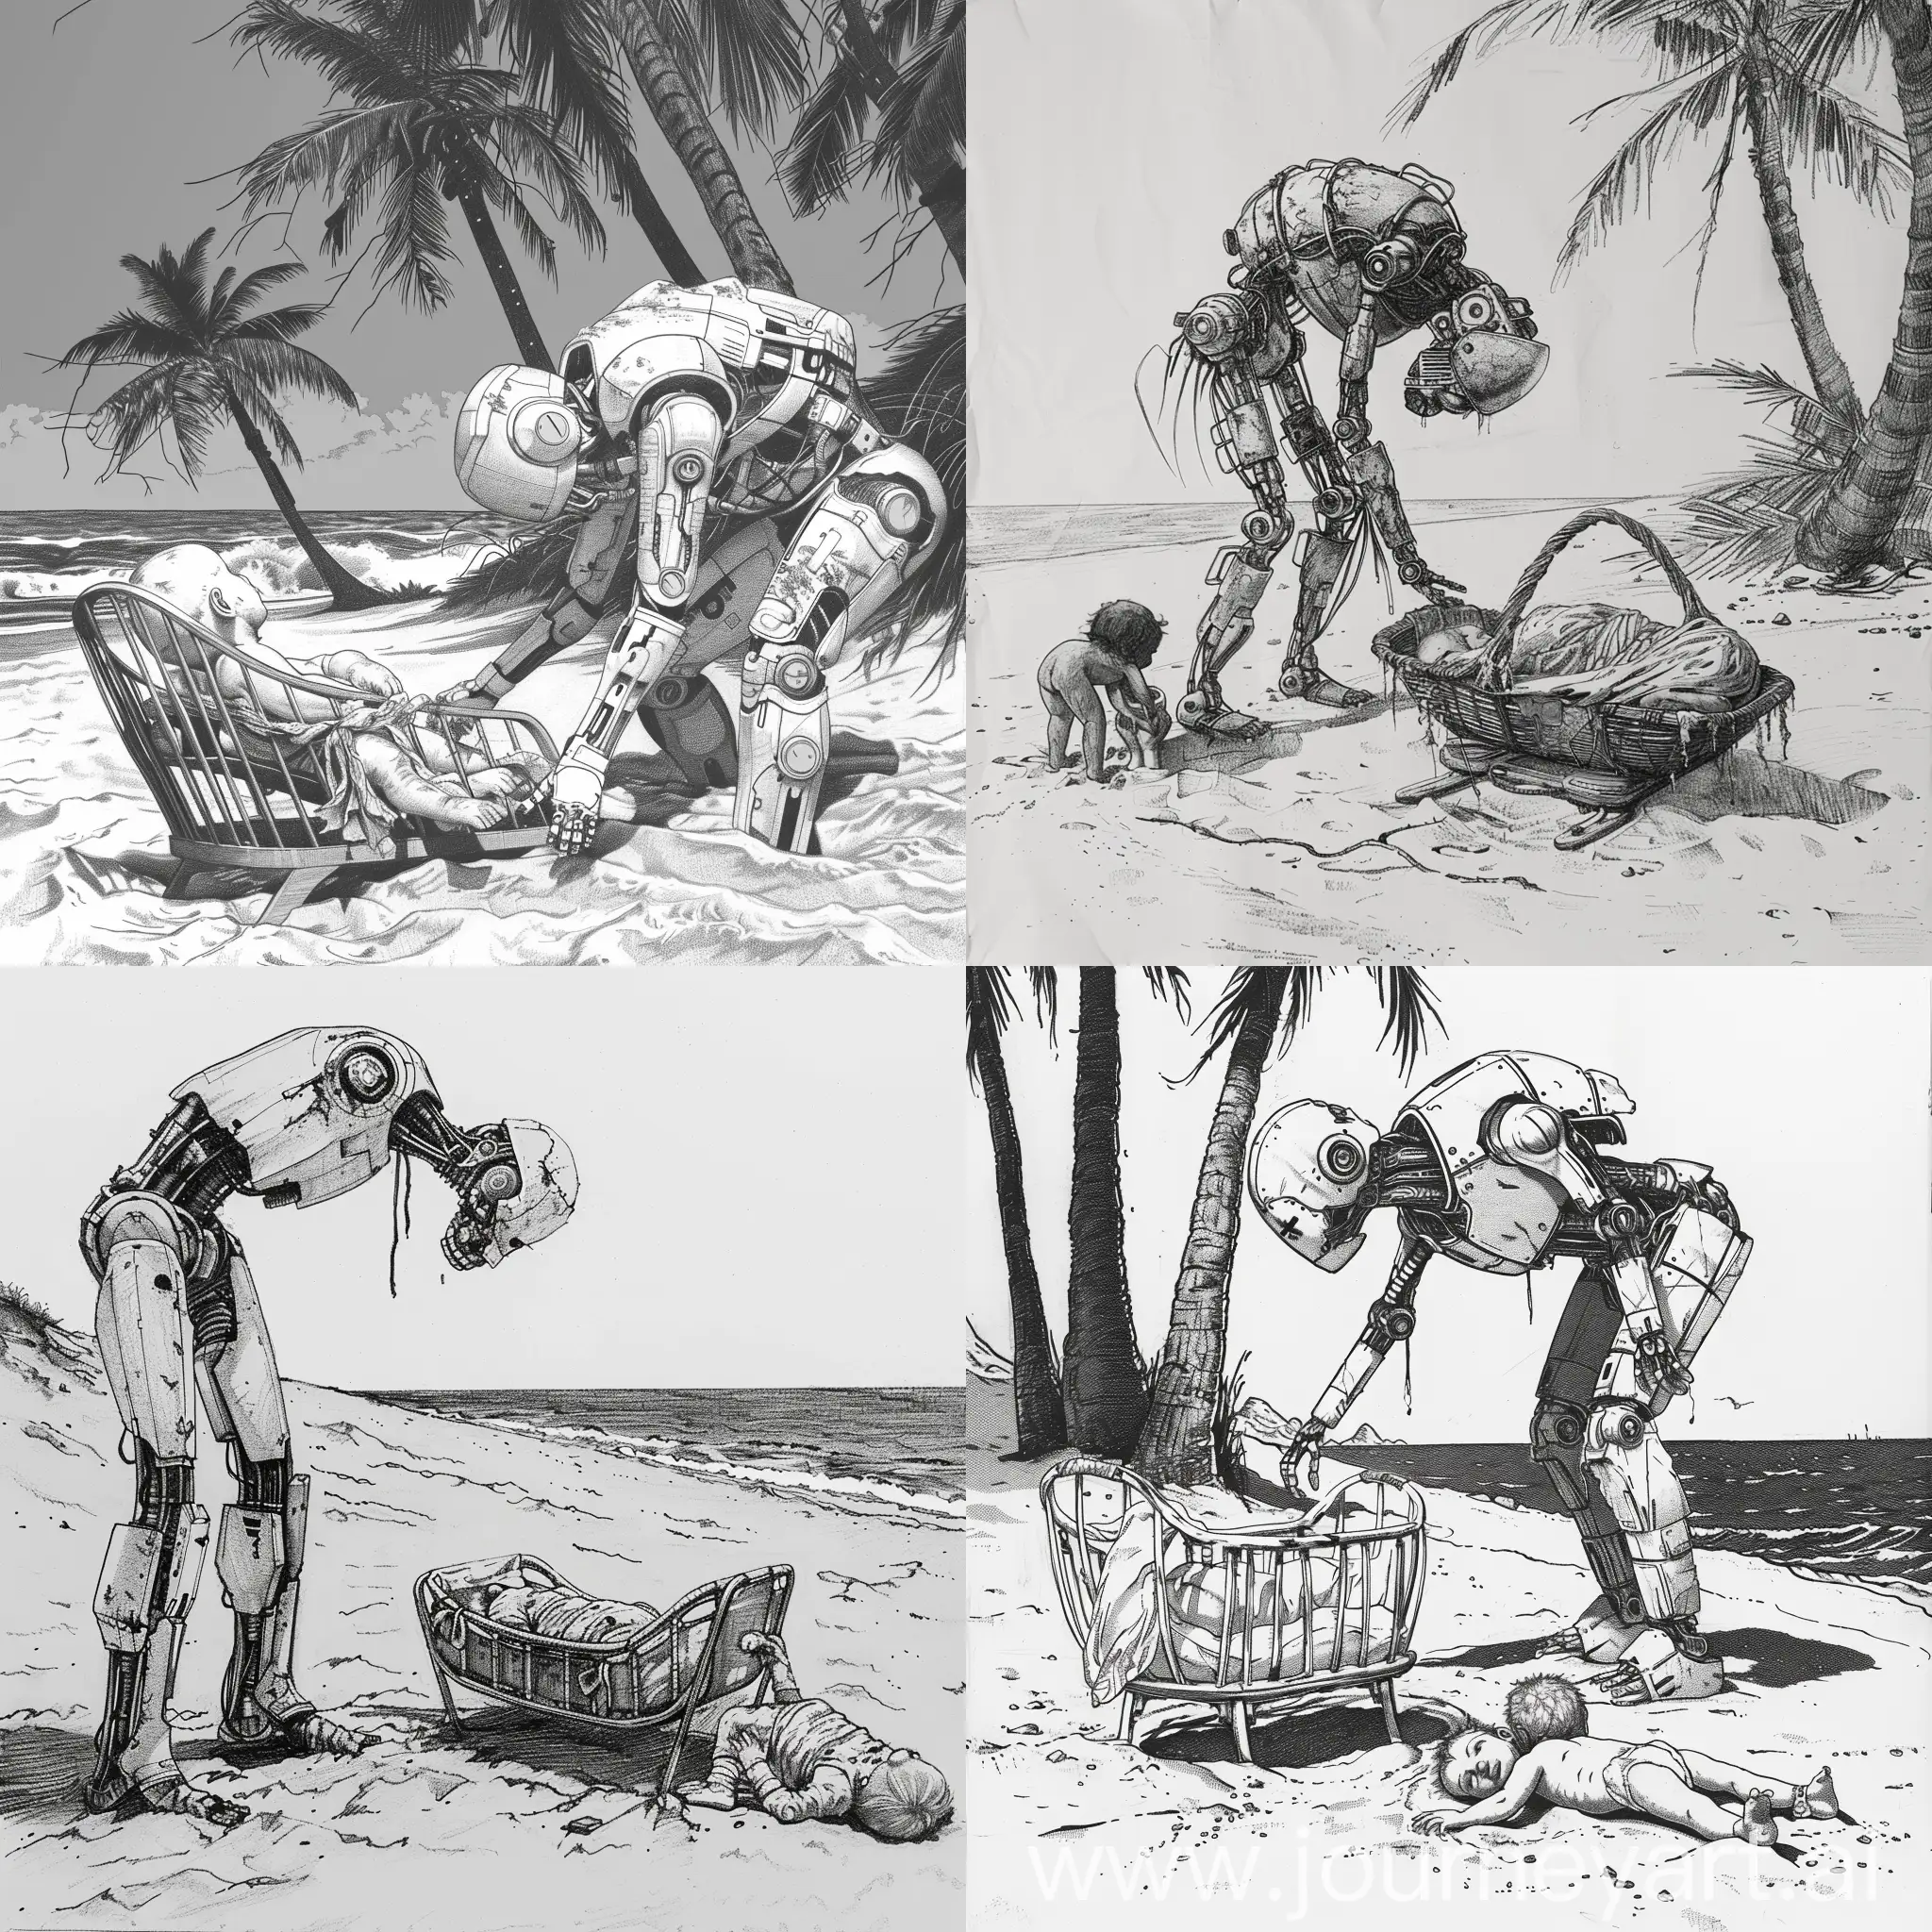 Mexican-Beach-Scene-with-Cradle-and-Damaged-Robot-Nanny